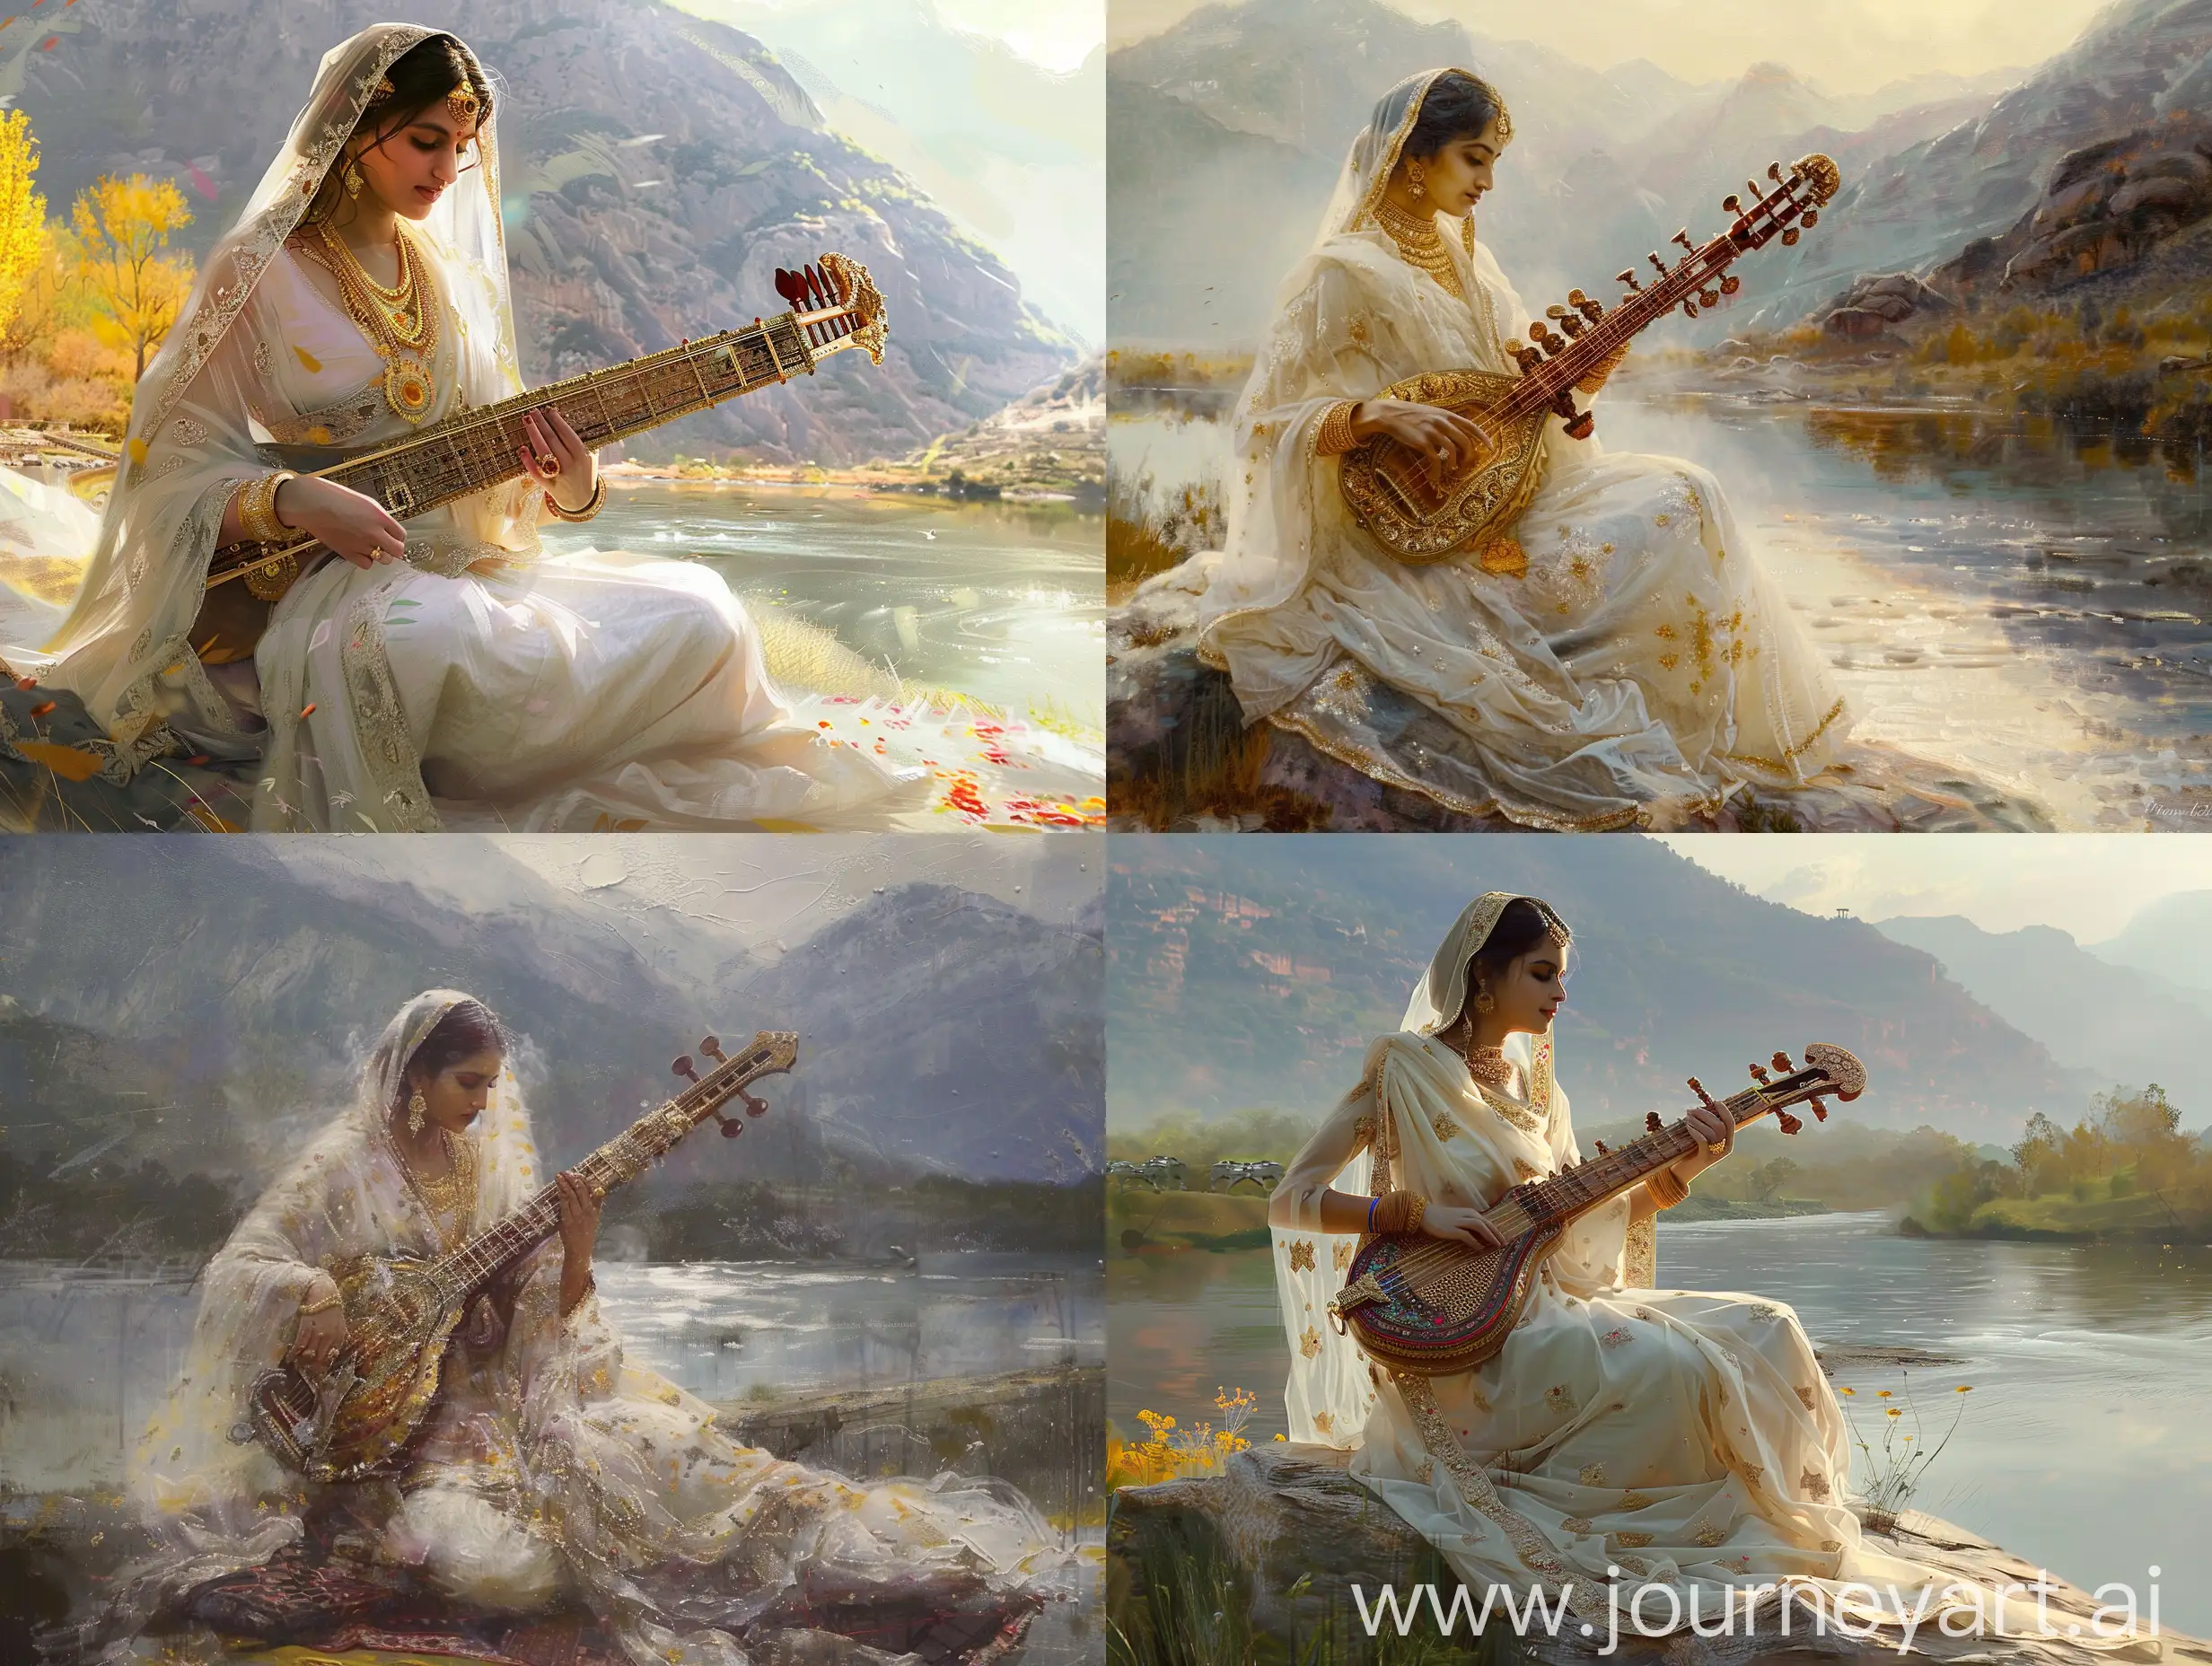 Impressionist-Image-of-a-Lady-Playing-Sitar-by-the-Riverside-at-Sunrise